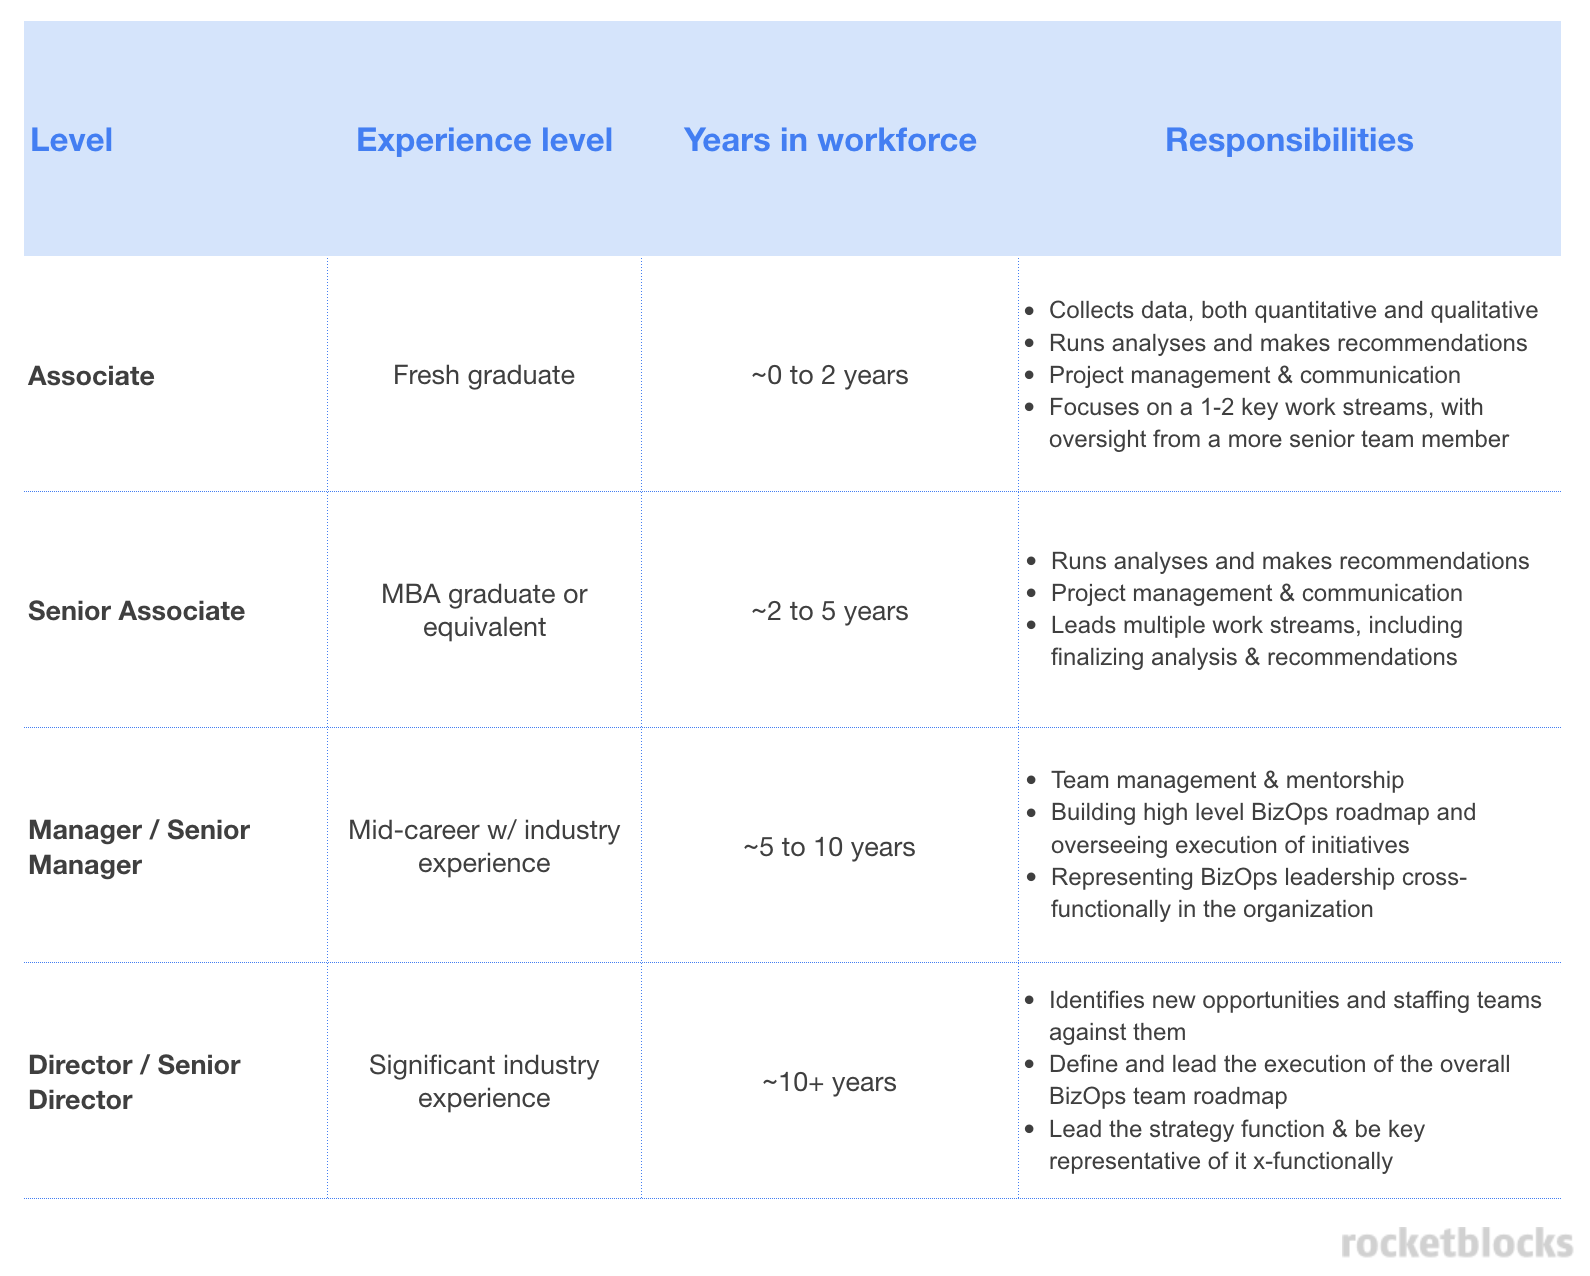 Strategy & biz ops career path and responsibilities